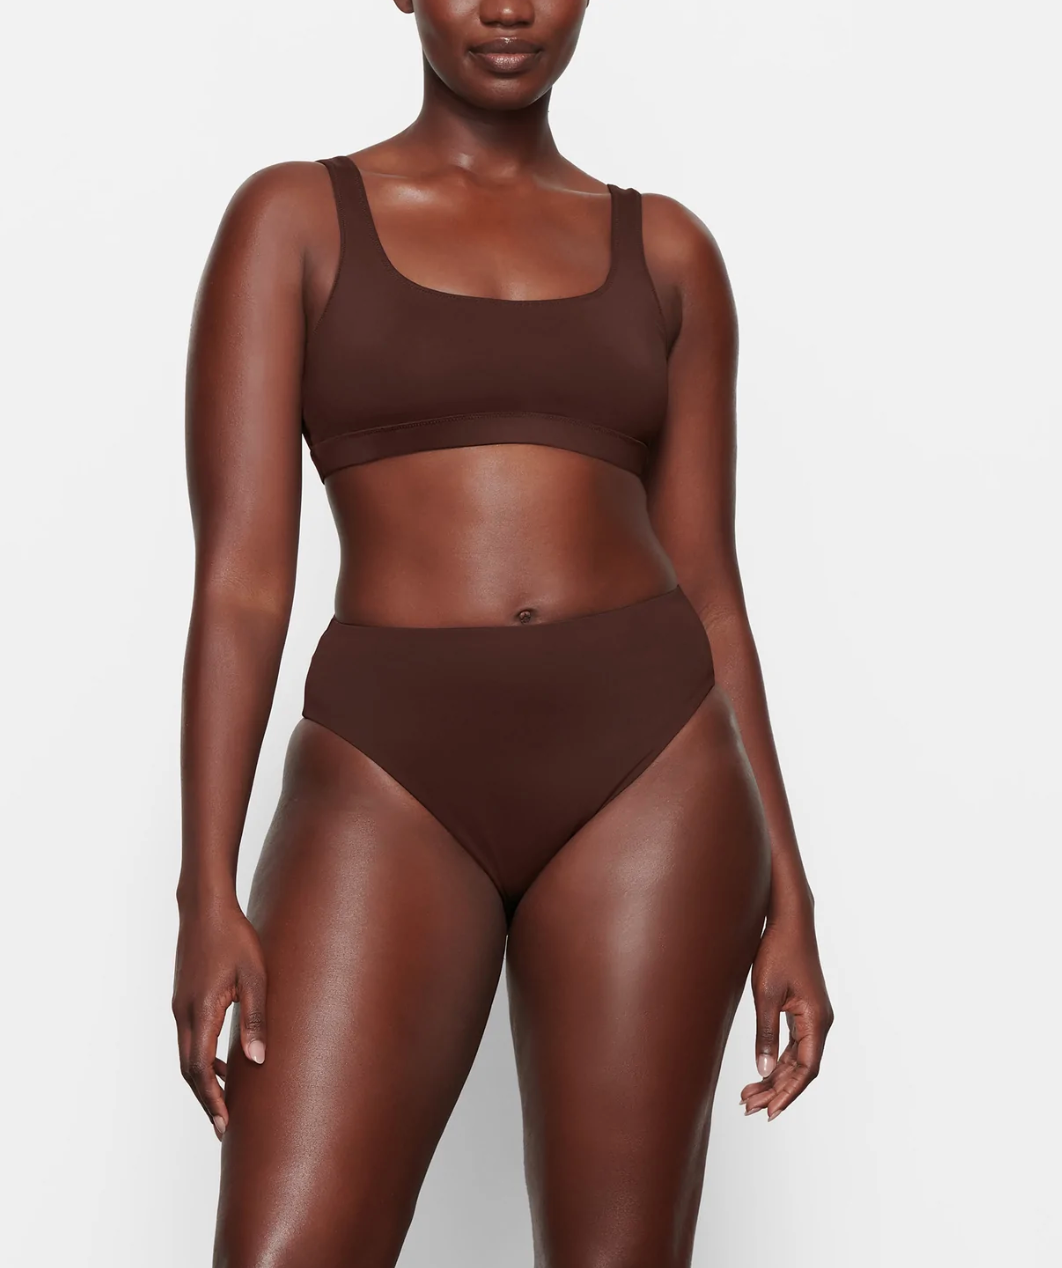 Is Skims Swim Collection Worth It? R29 Editors Review.